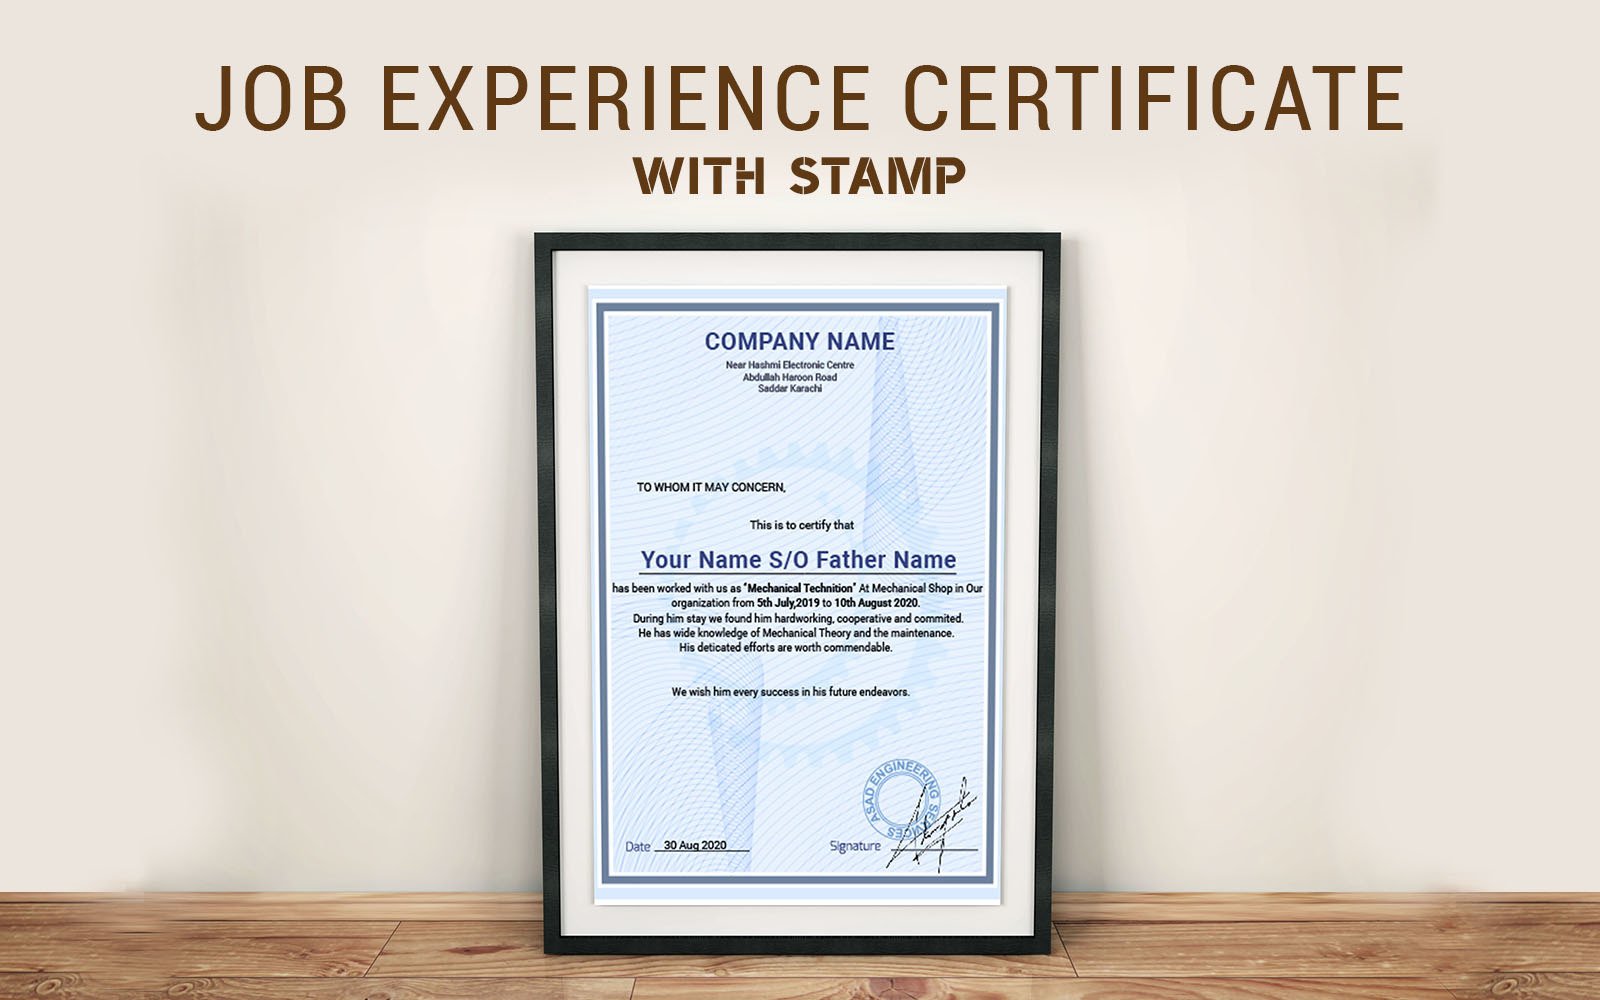 Certificate Of Experience Template